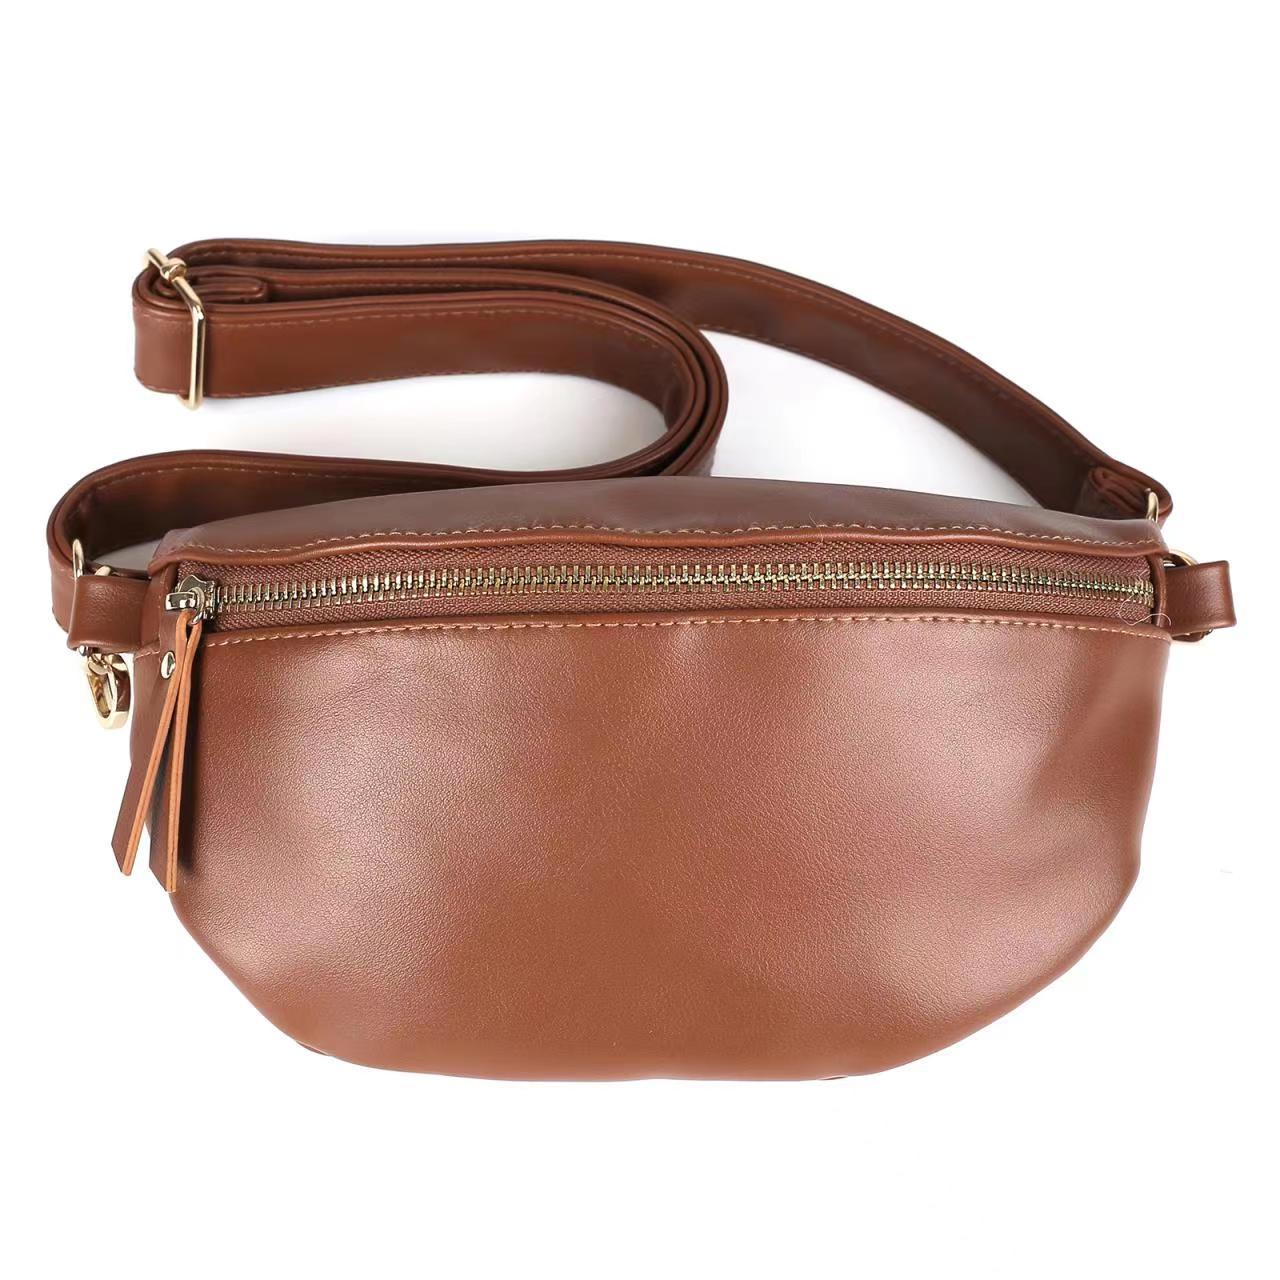 Sac banane bandoulière femme cuir vintage marron LY/Redesigned by